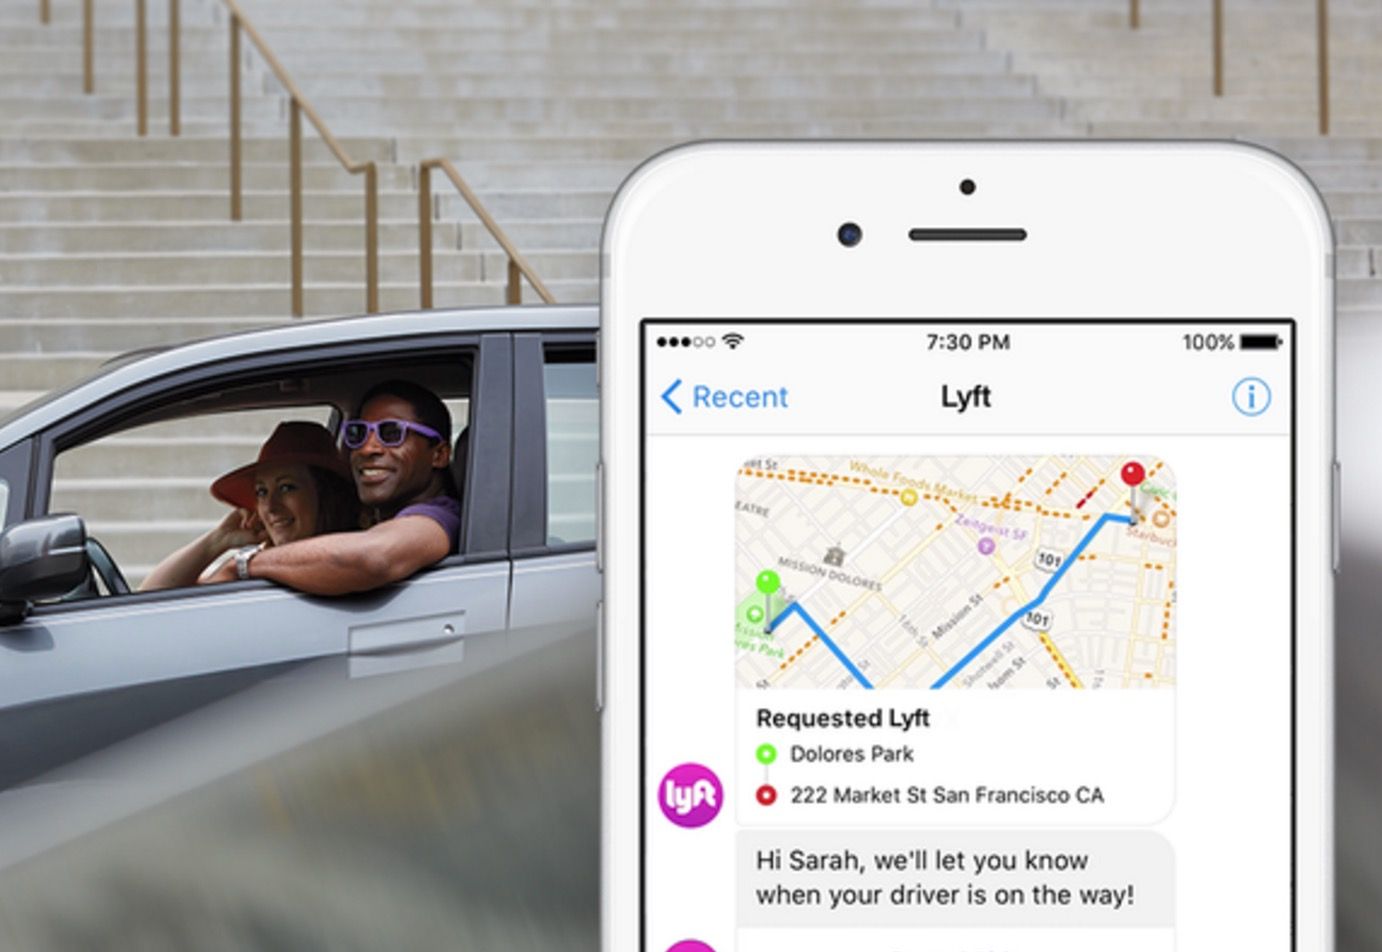 lyft now lets you hail a car from within fb messenger slack and more image 1